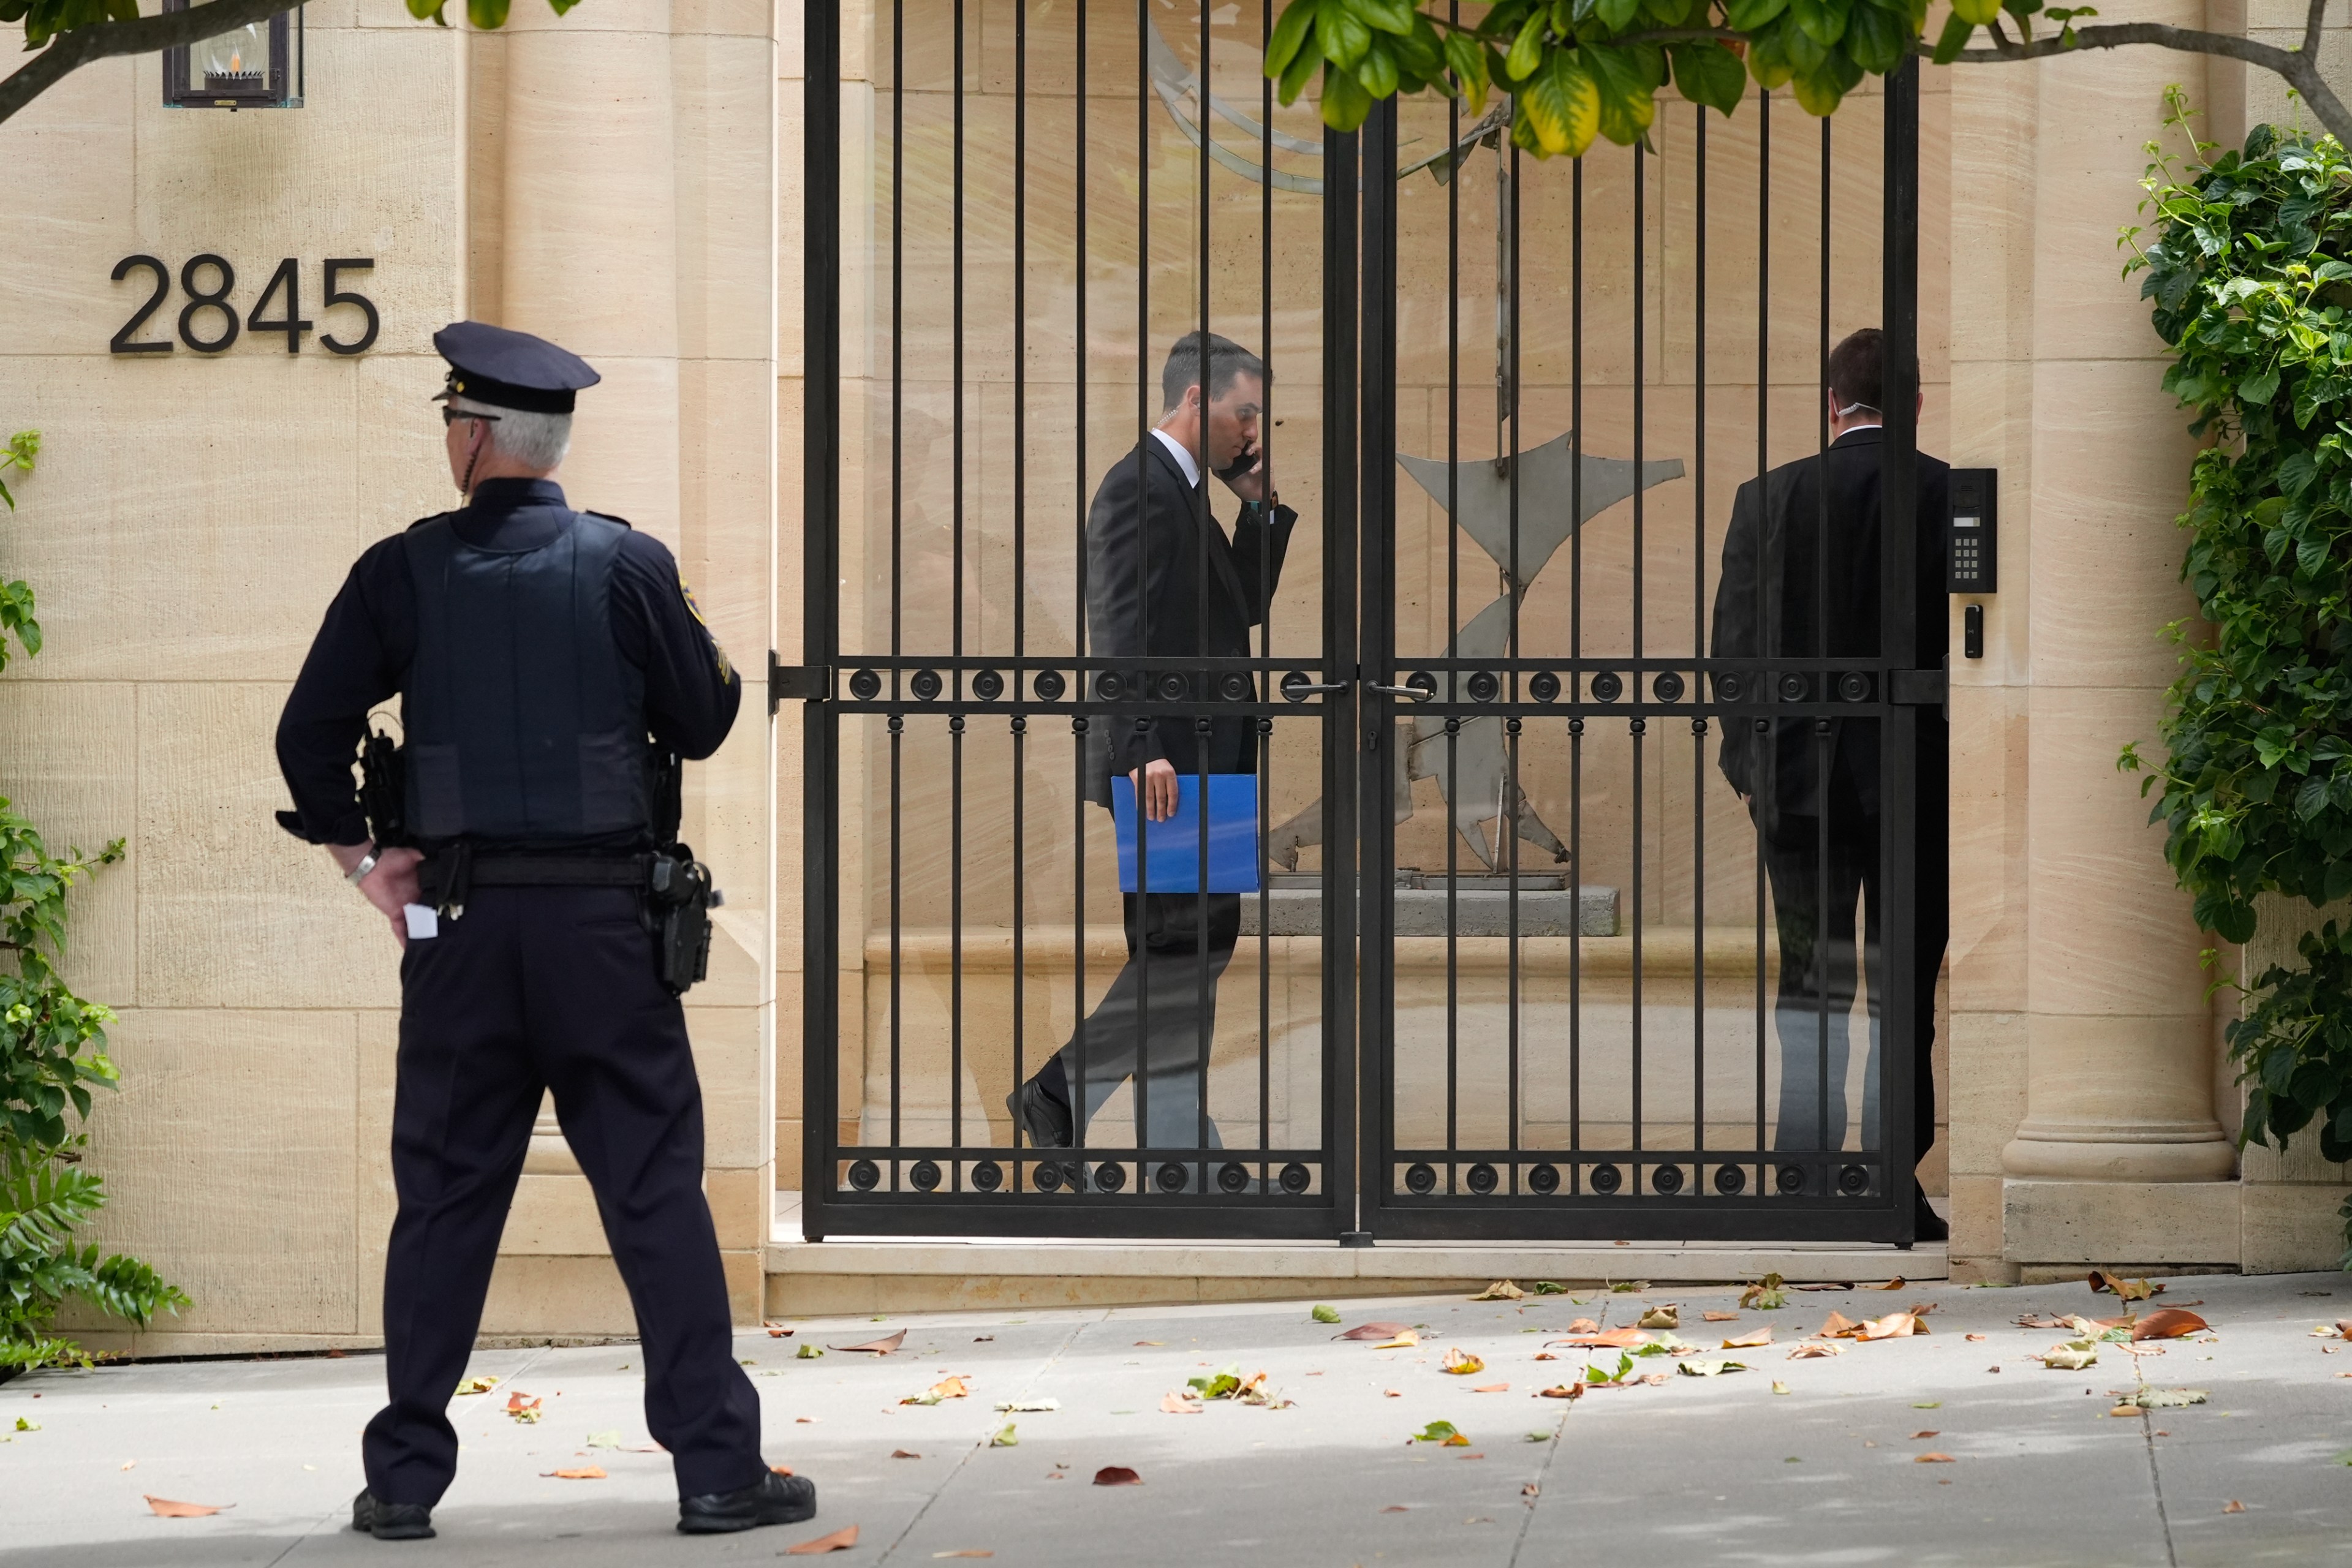 A police officer stands guard outside a gated building at 2845, while two men in suits enter, one using a keypad and the other on the phone, holding a blue folder.